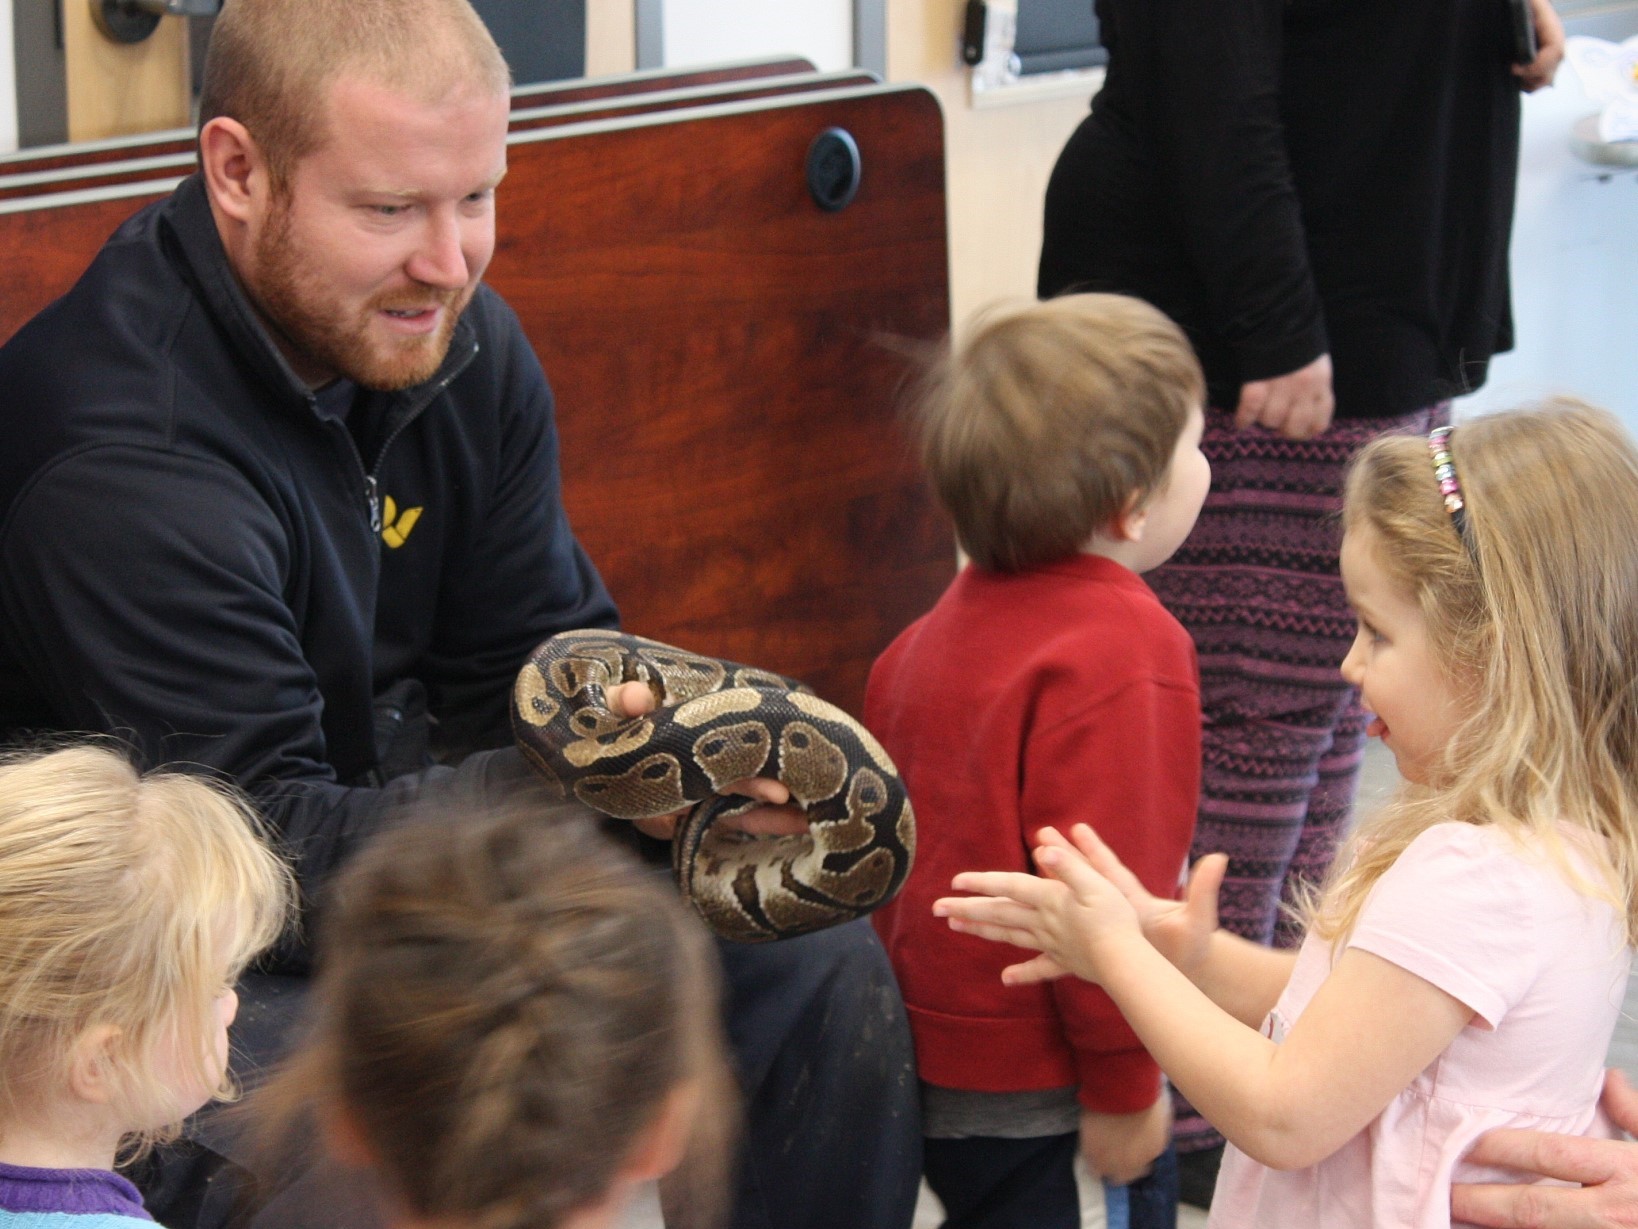 zoo staff holding a snake with children looking on